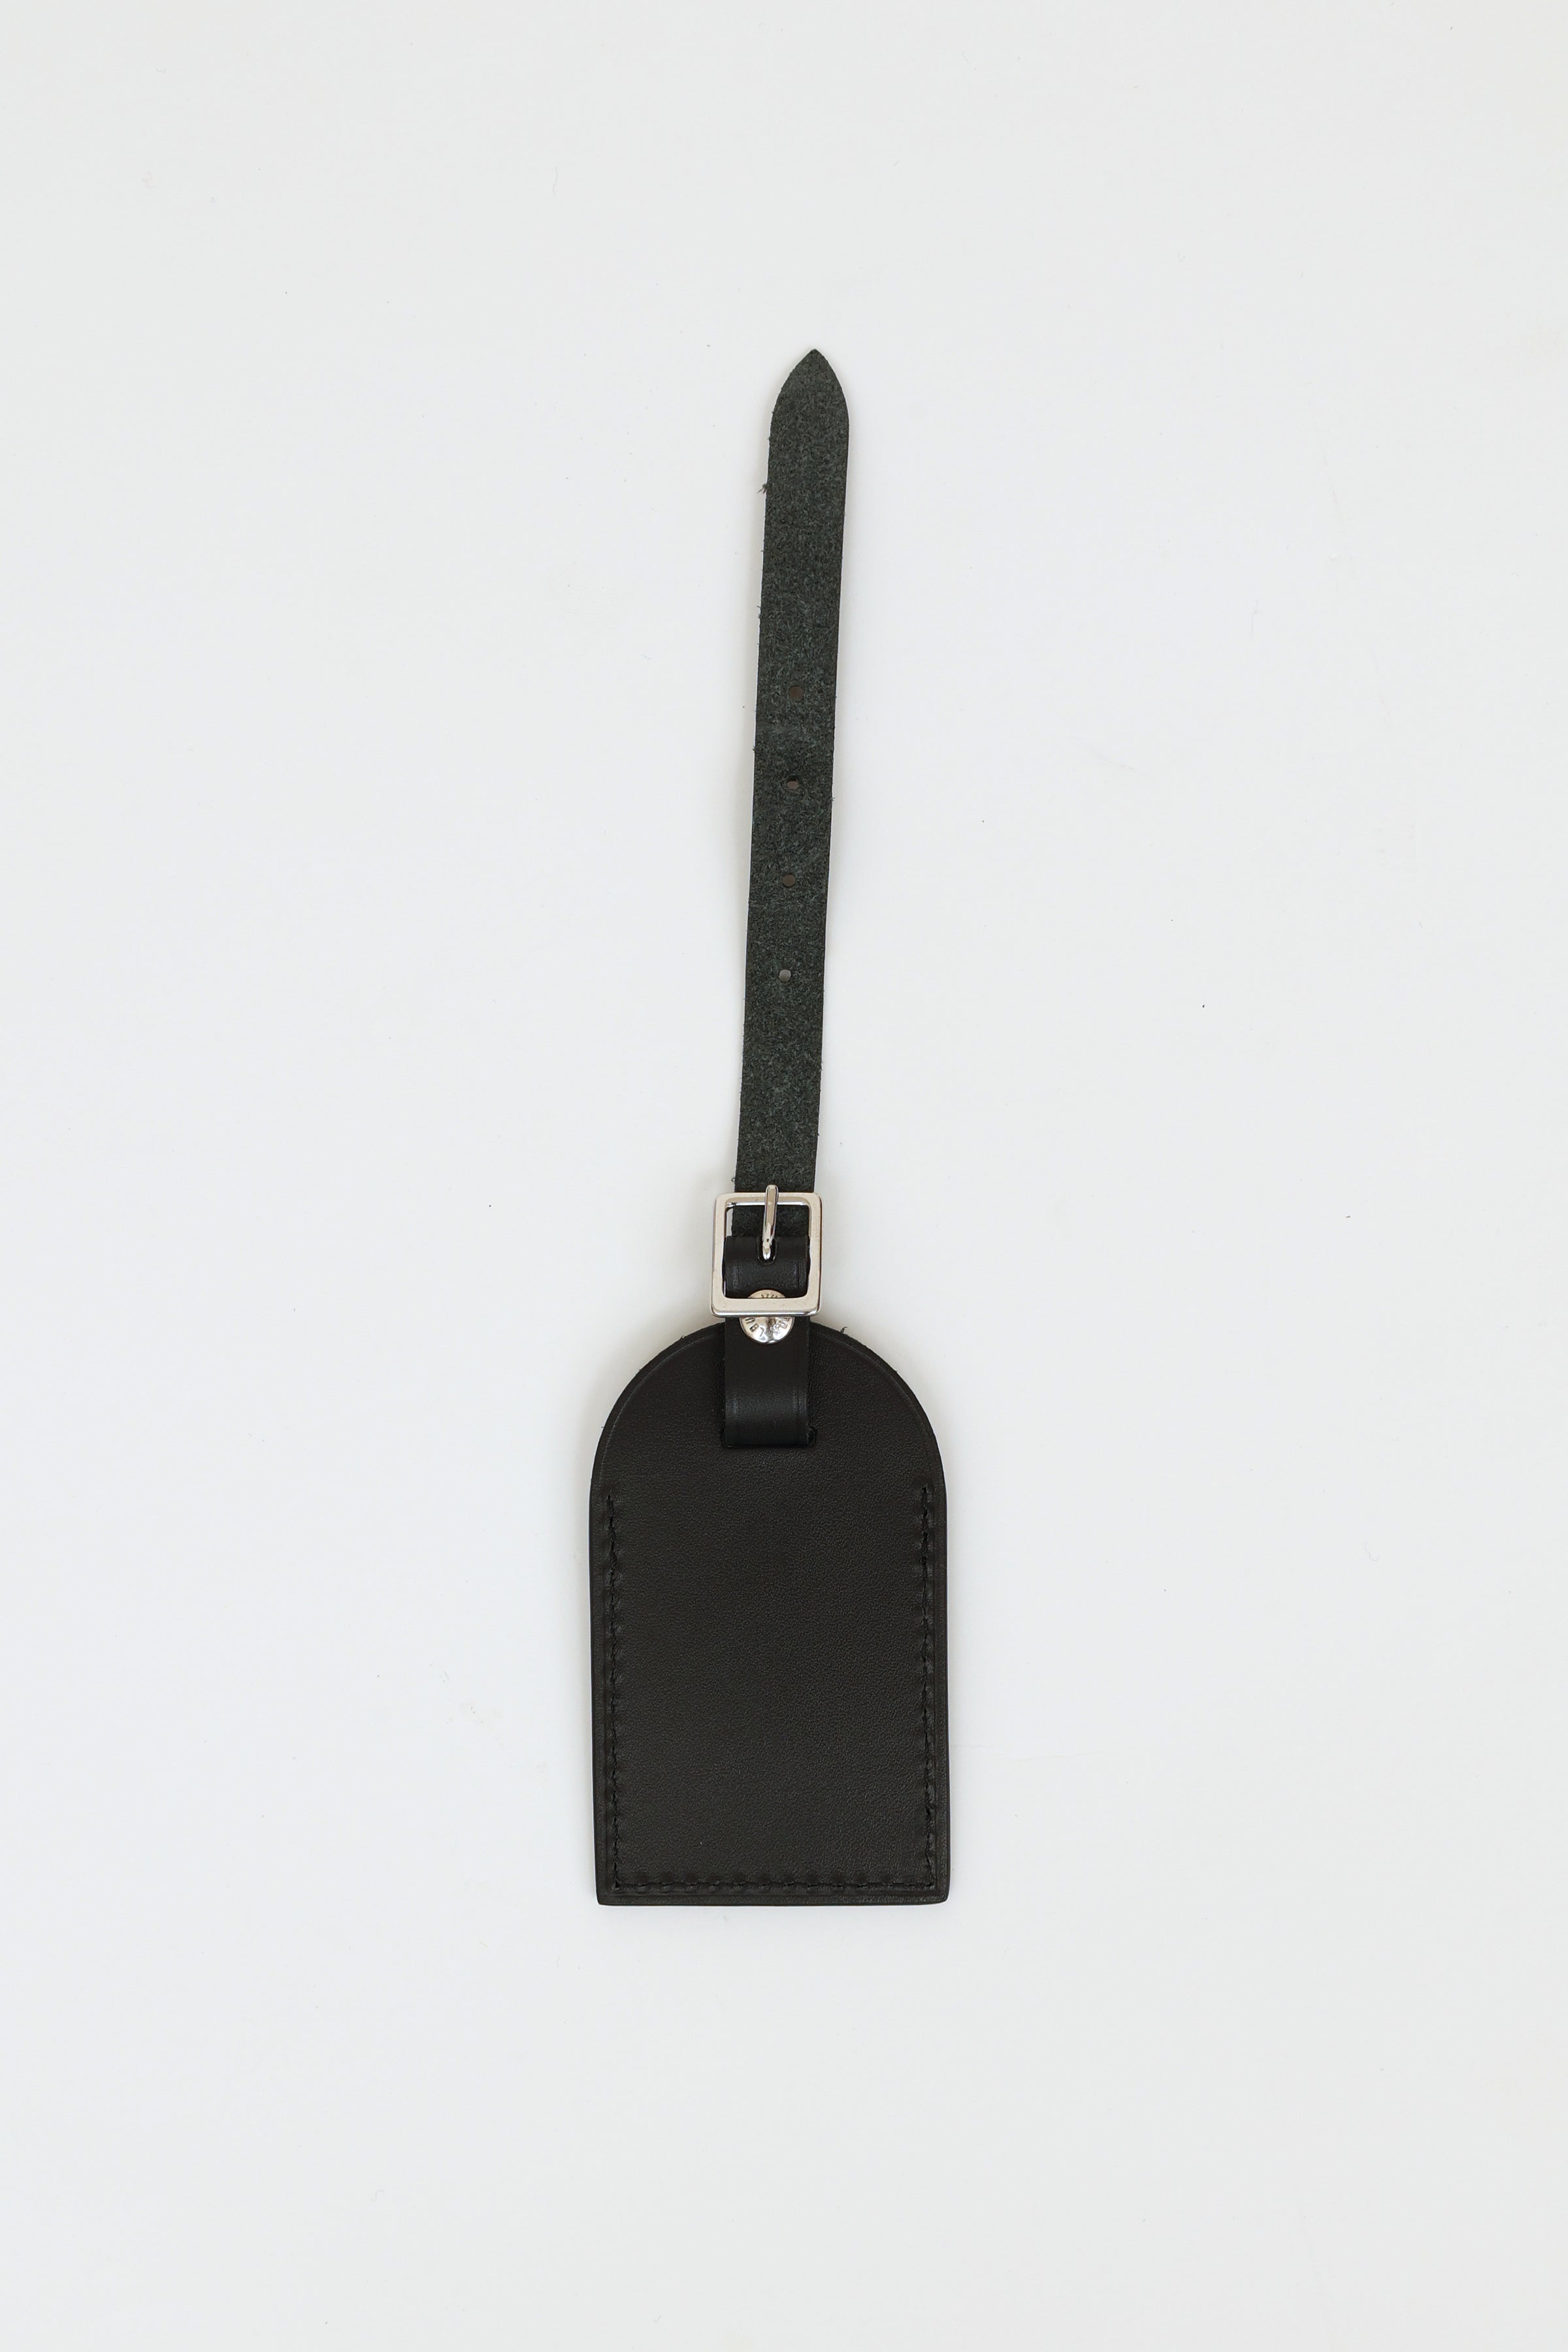 Louis Vuitton Luggage Tag - 234 For Sale on 1stDibs  louis luggage tag, louis  vuitton luggage tag black, louis vuitton luggage tag for sale